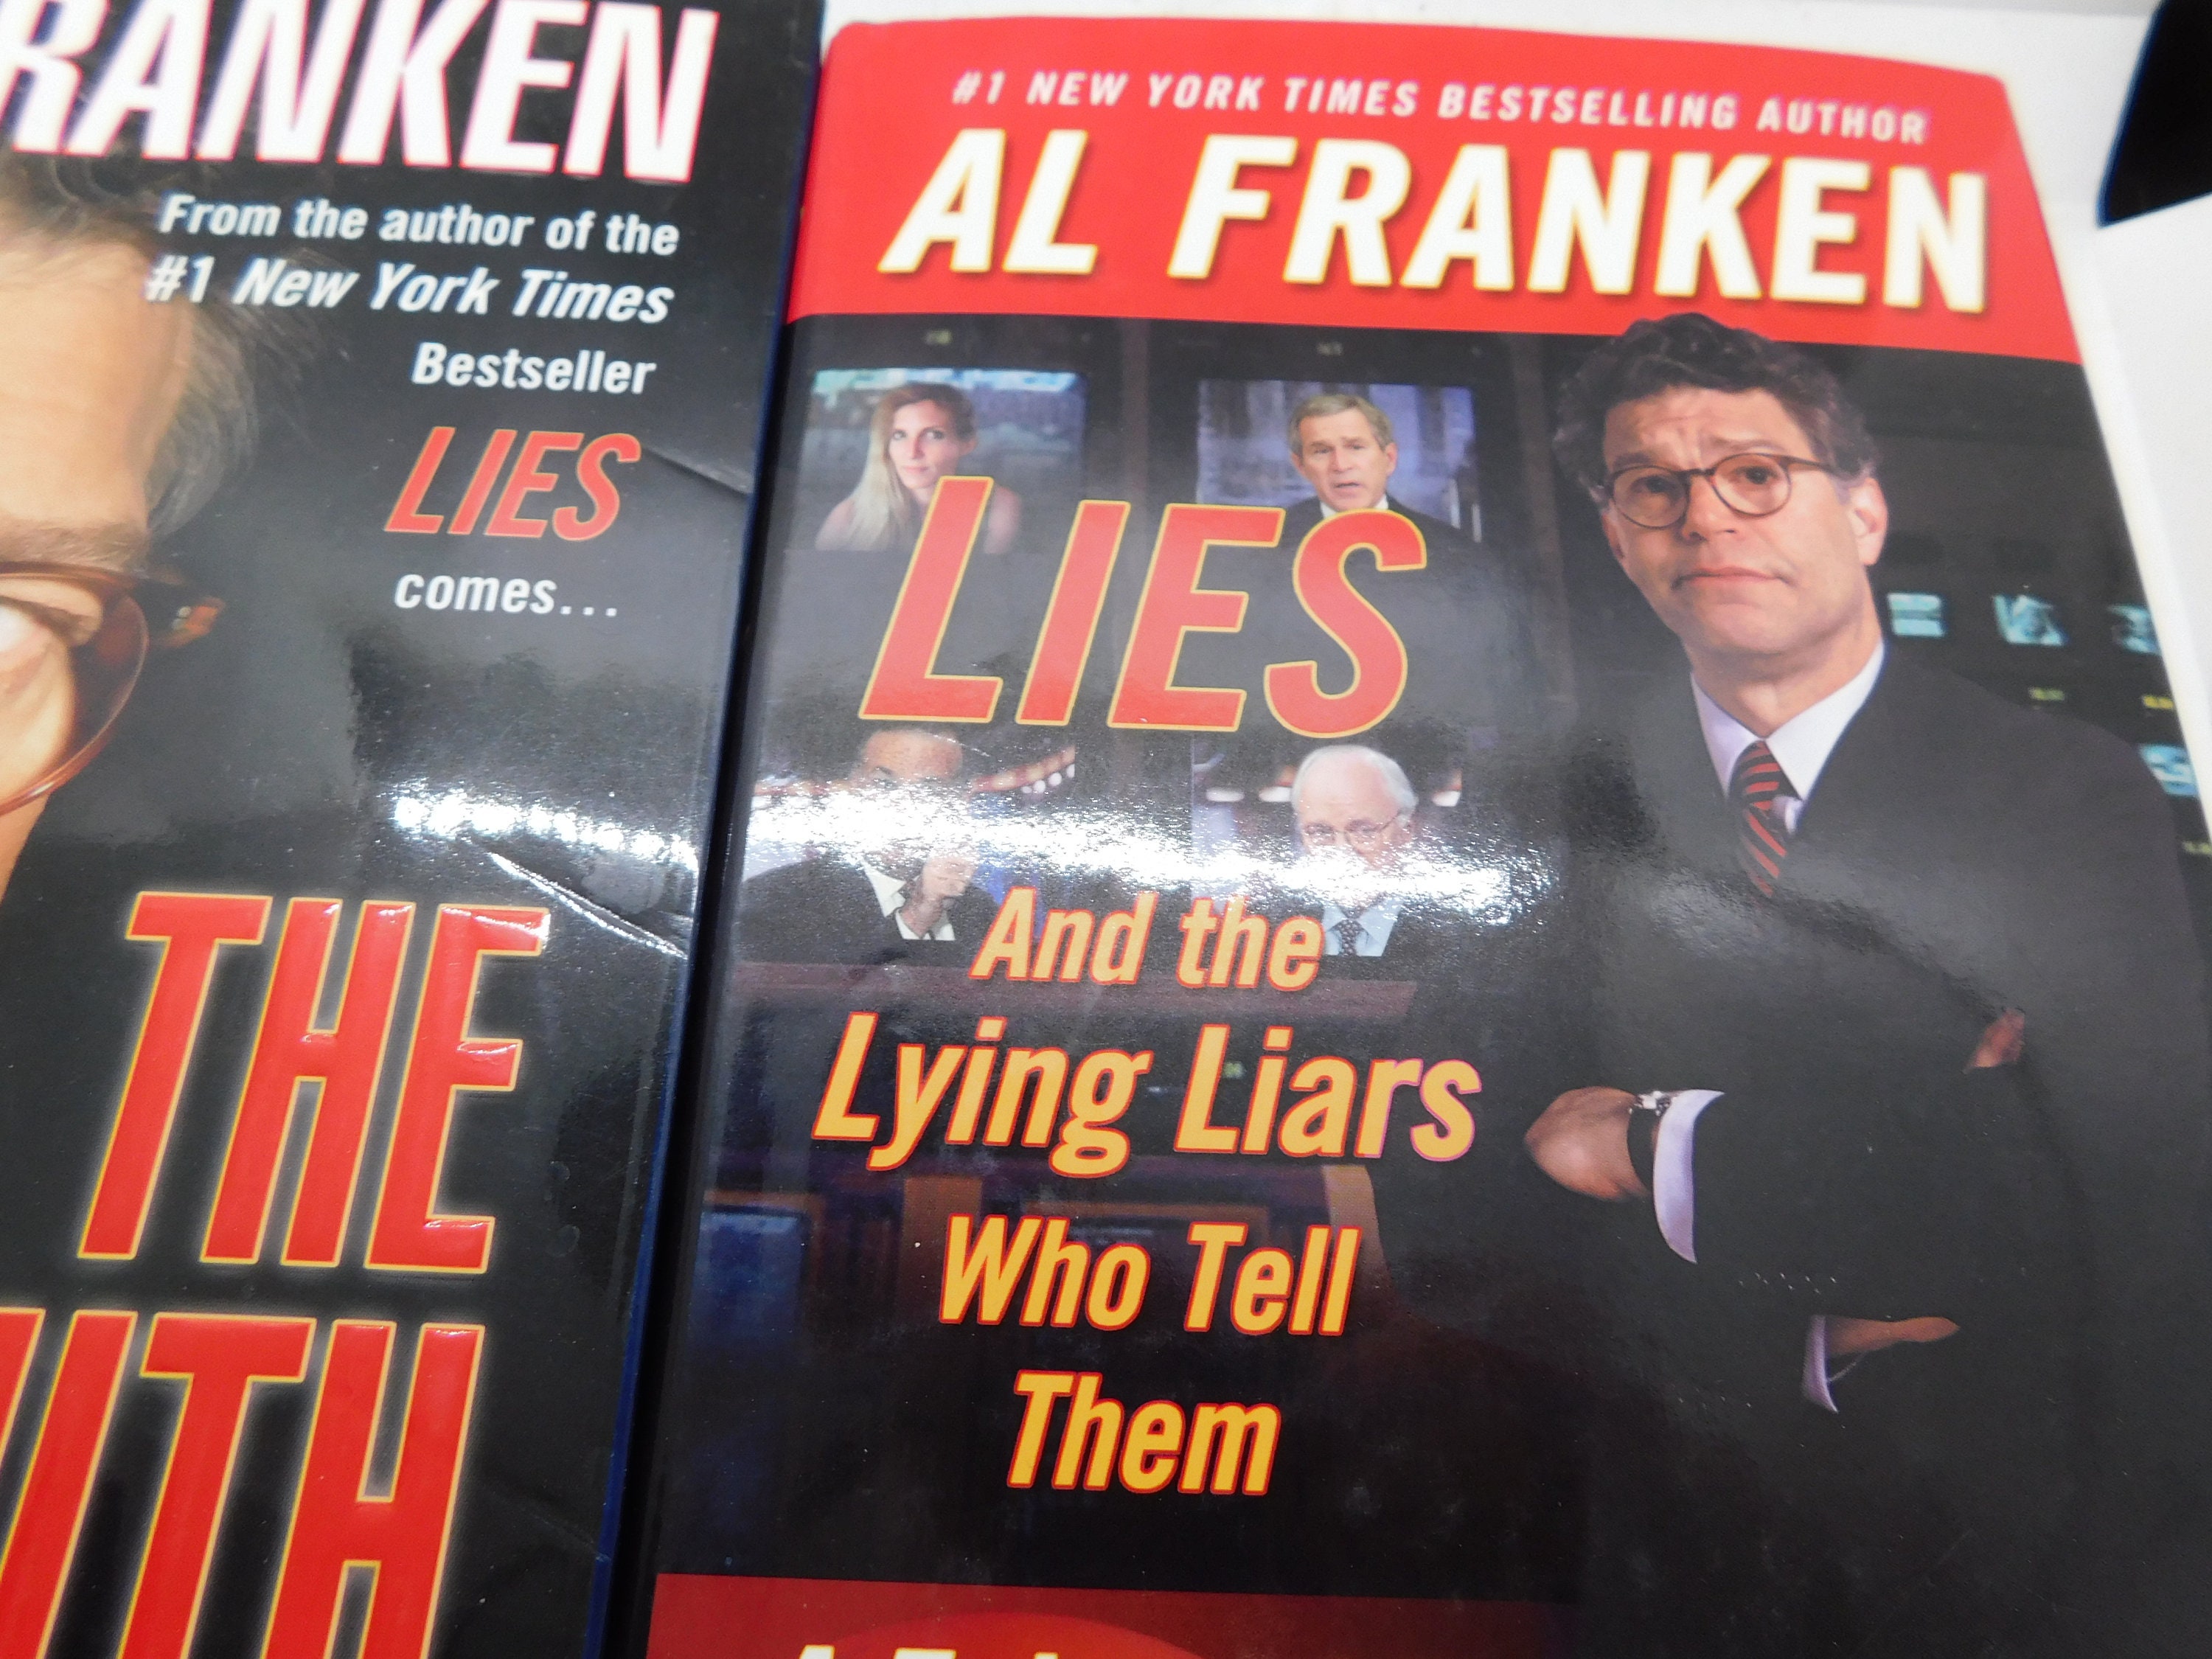 Tghe　Liars　Lies　Etsy　196　Books　the　Franken　Al　Lying　Truth　and